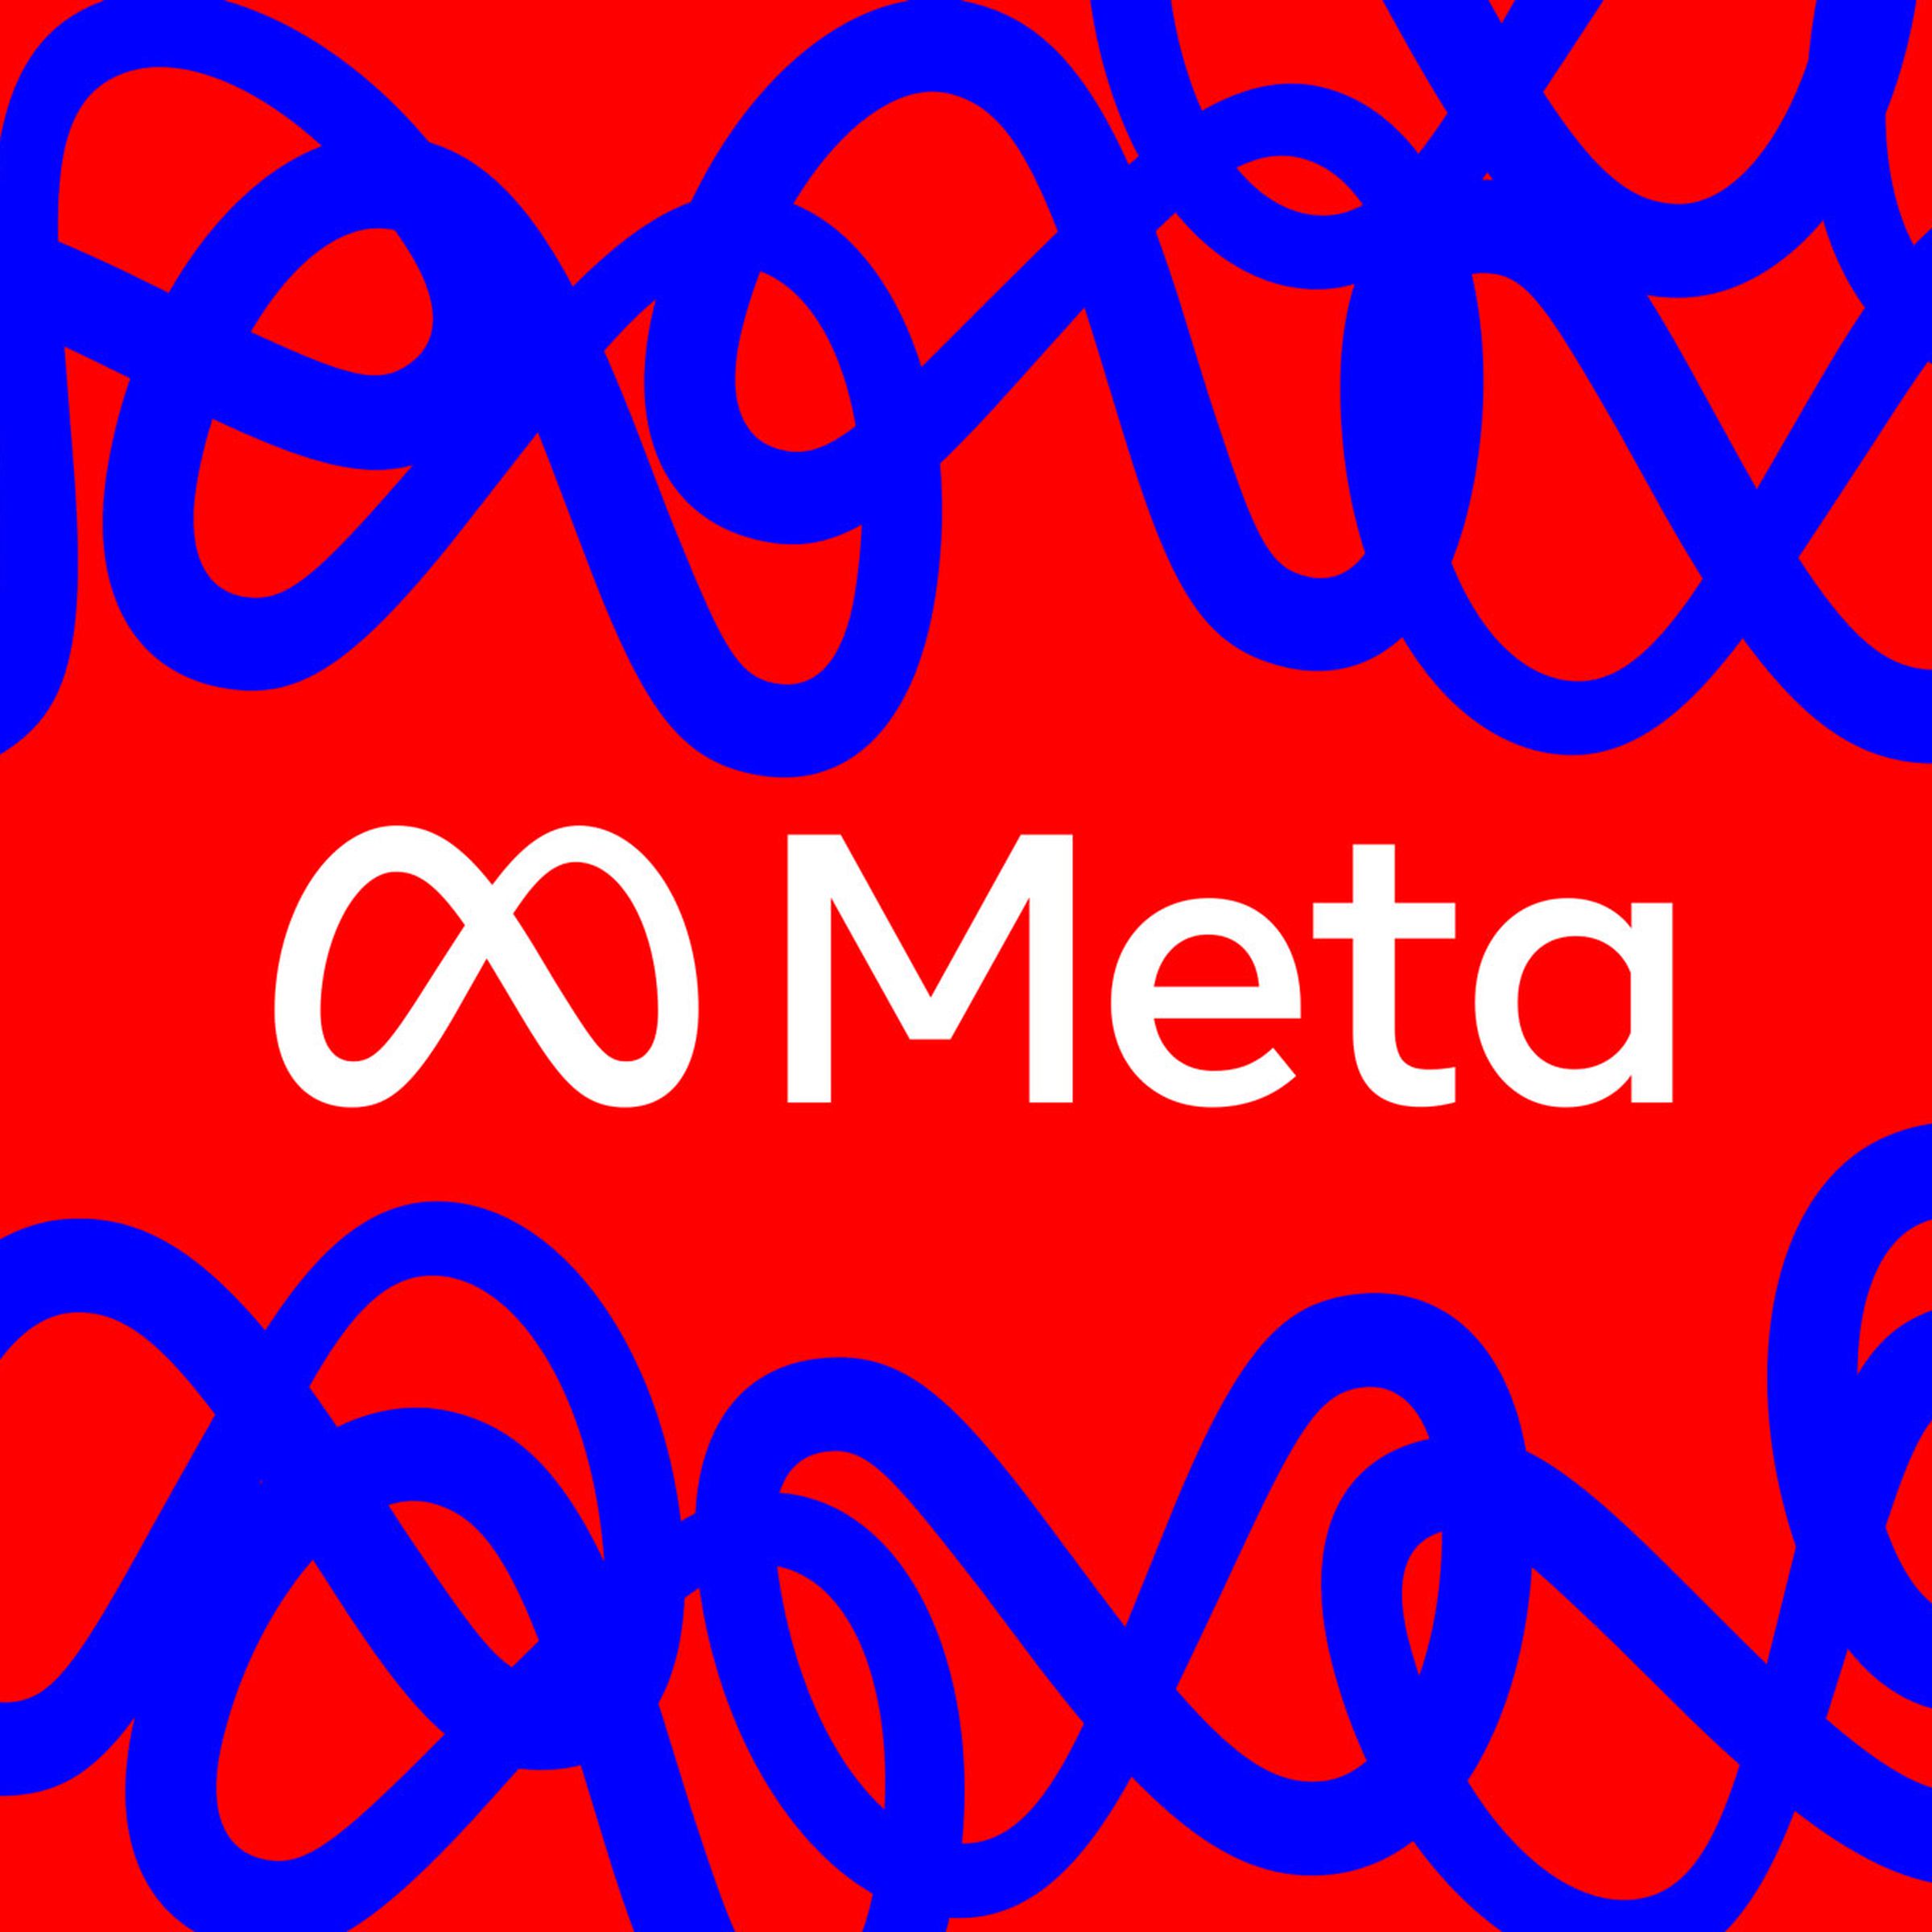 Image of Meta’s wordmark on a red background.